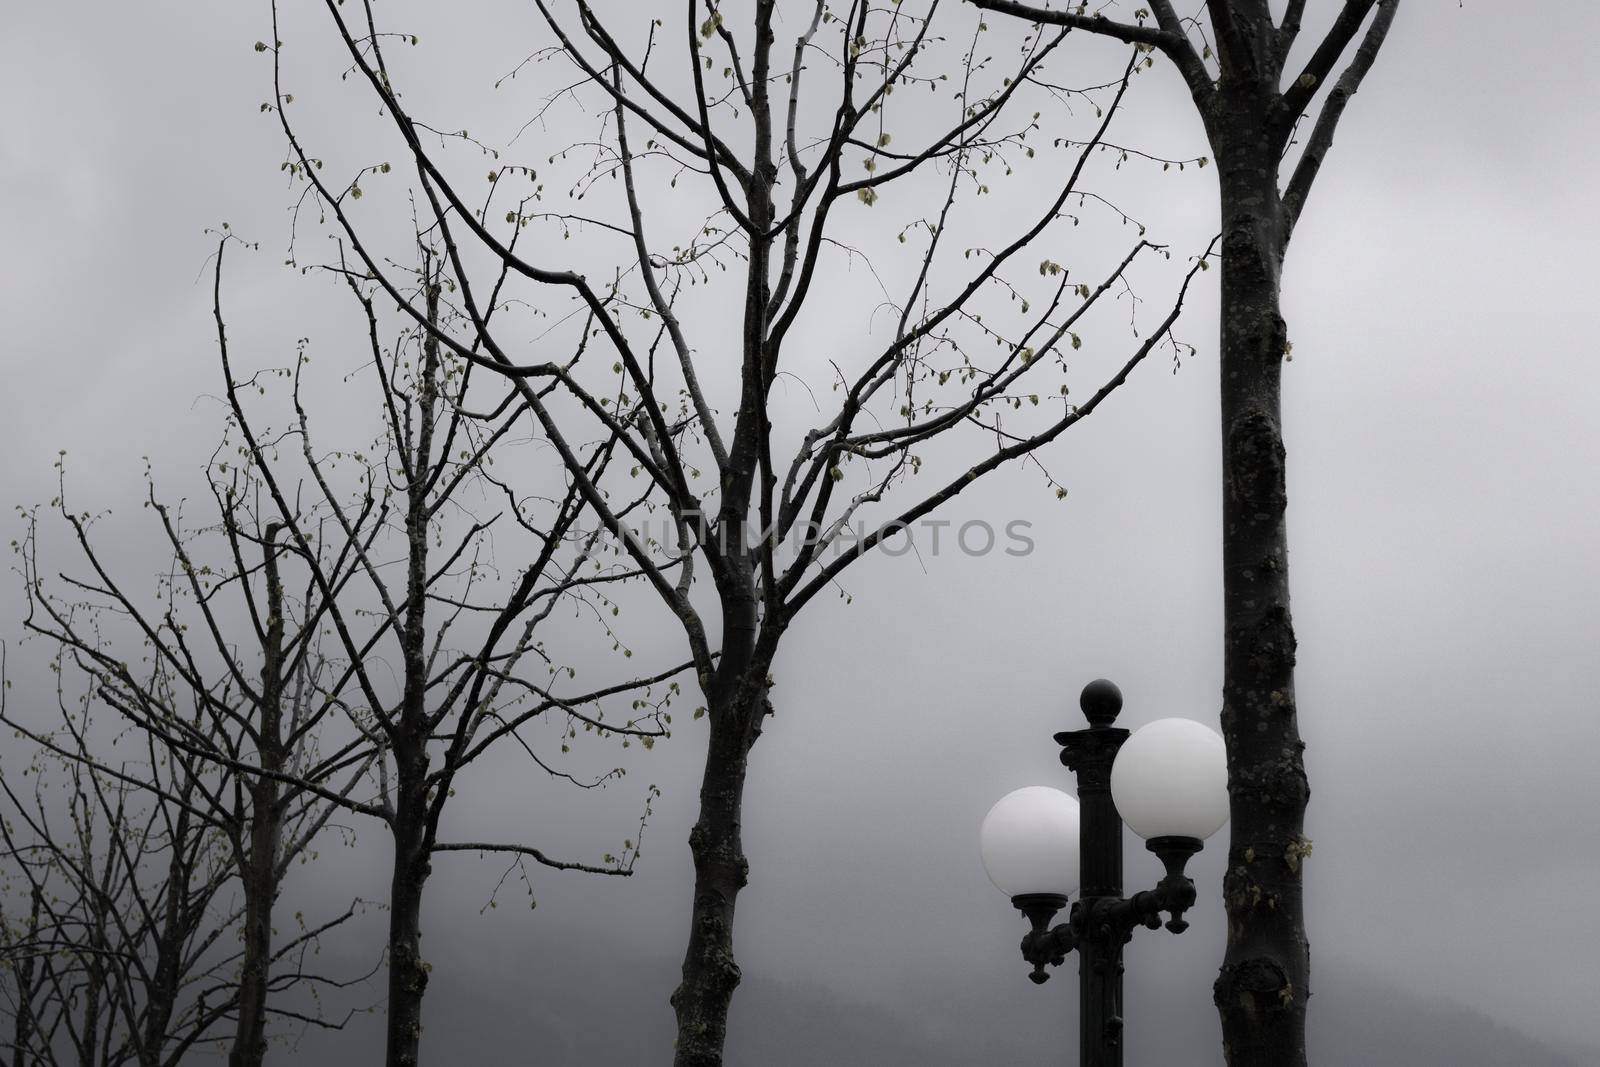 Trees and a street lamp by ValentimePix